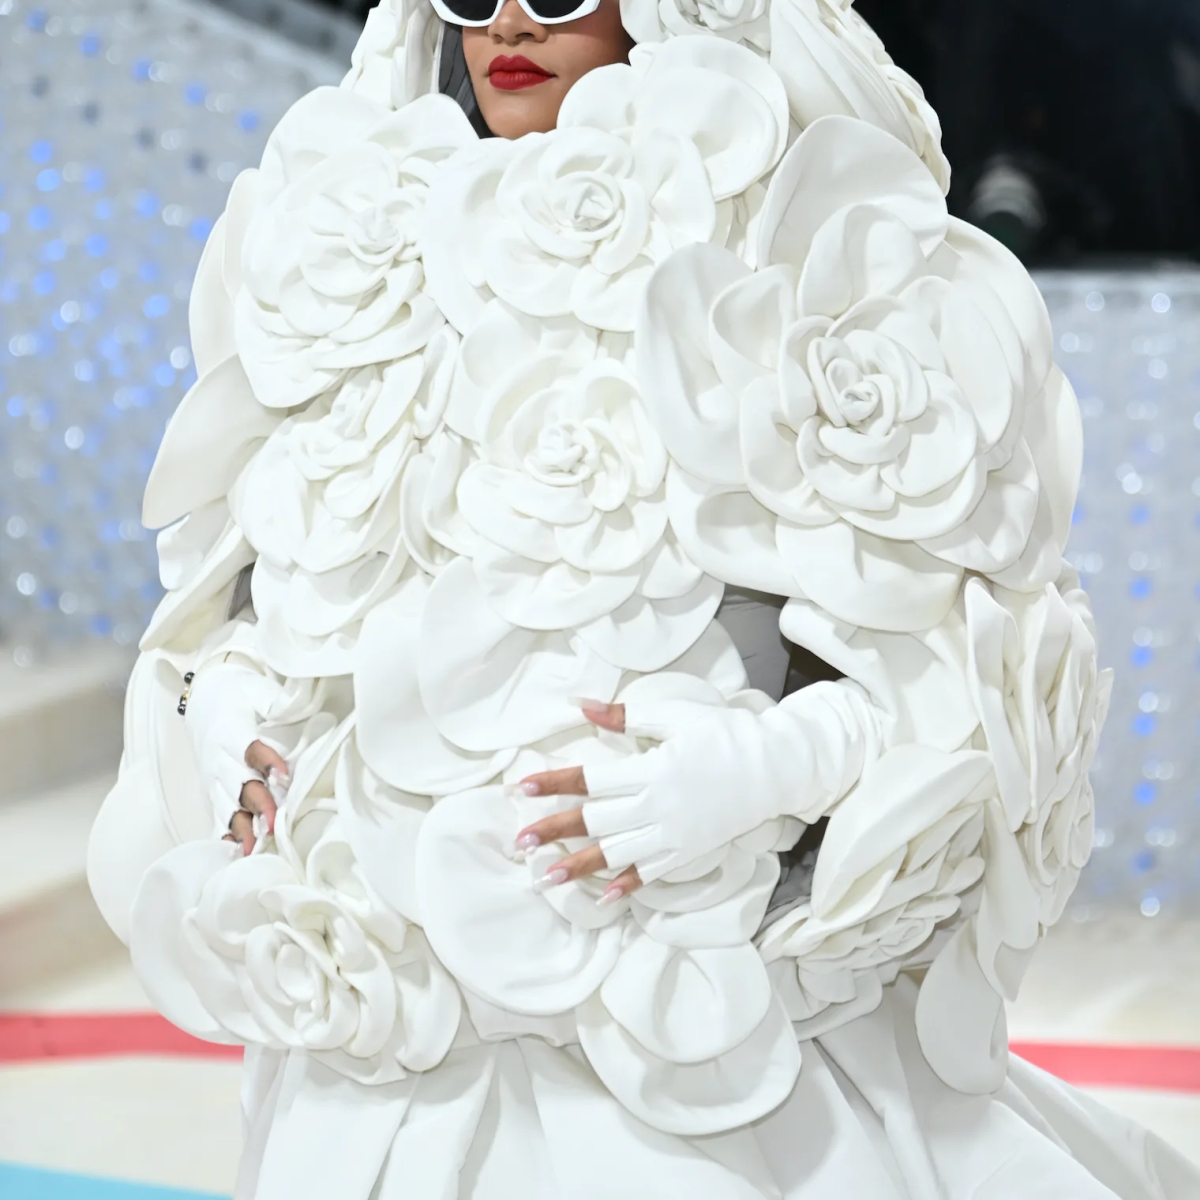 Met Gala 2023: Rihanna looked like a Beautiful Bride in All White & Florals